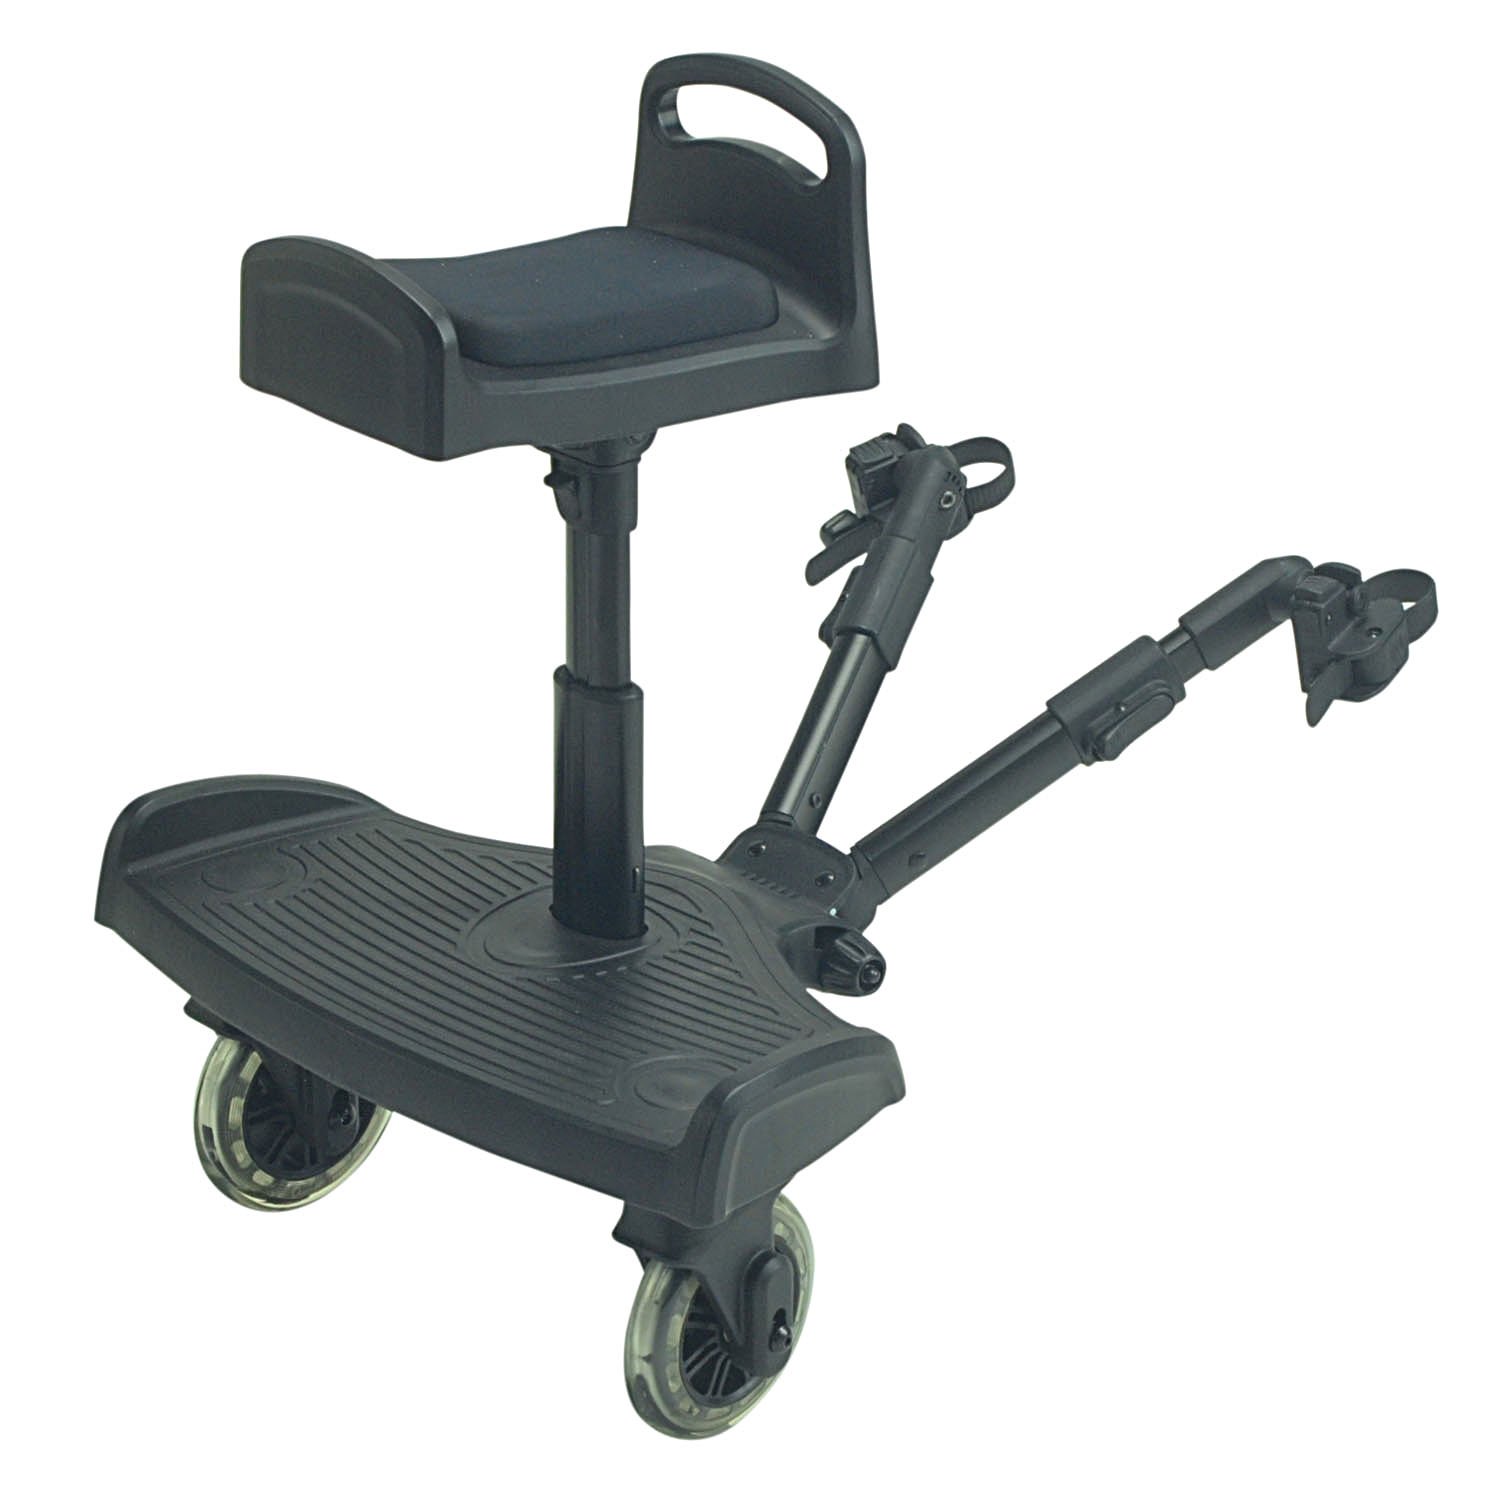 For-Your-Little-Ride On Board Compatible Travel Systems, EasyWalker Duo